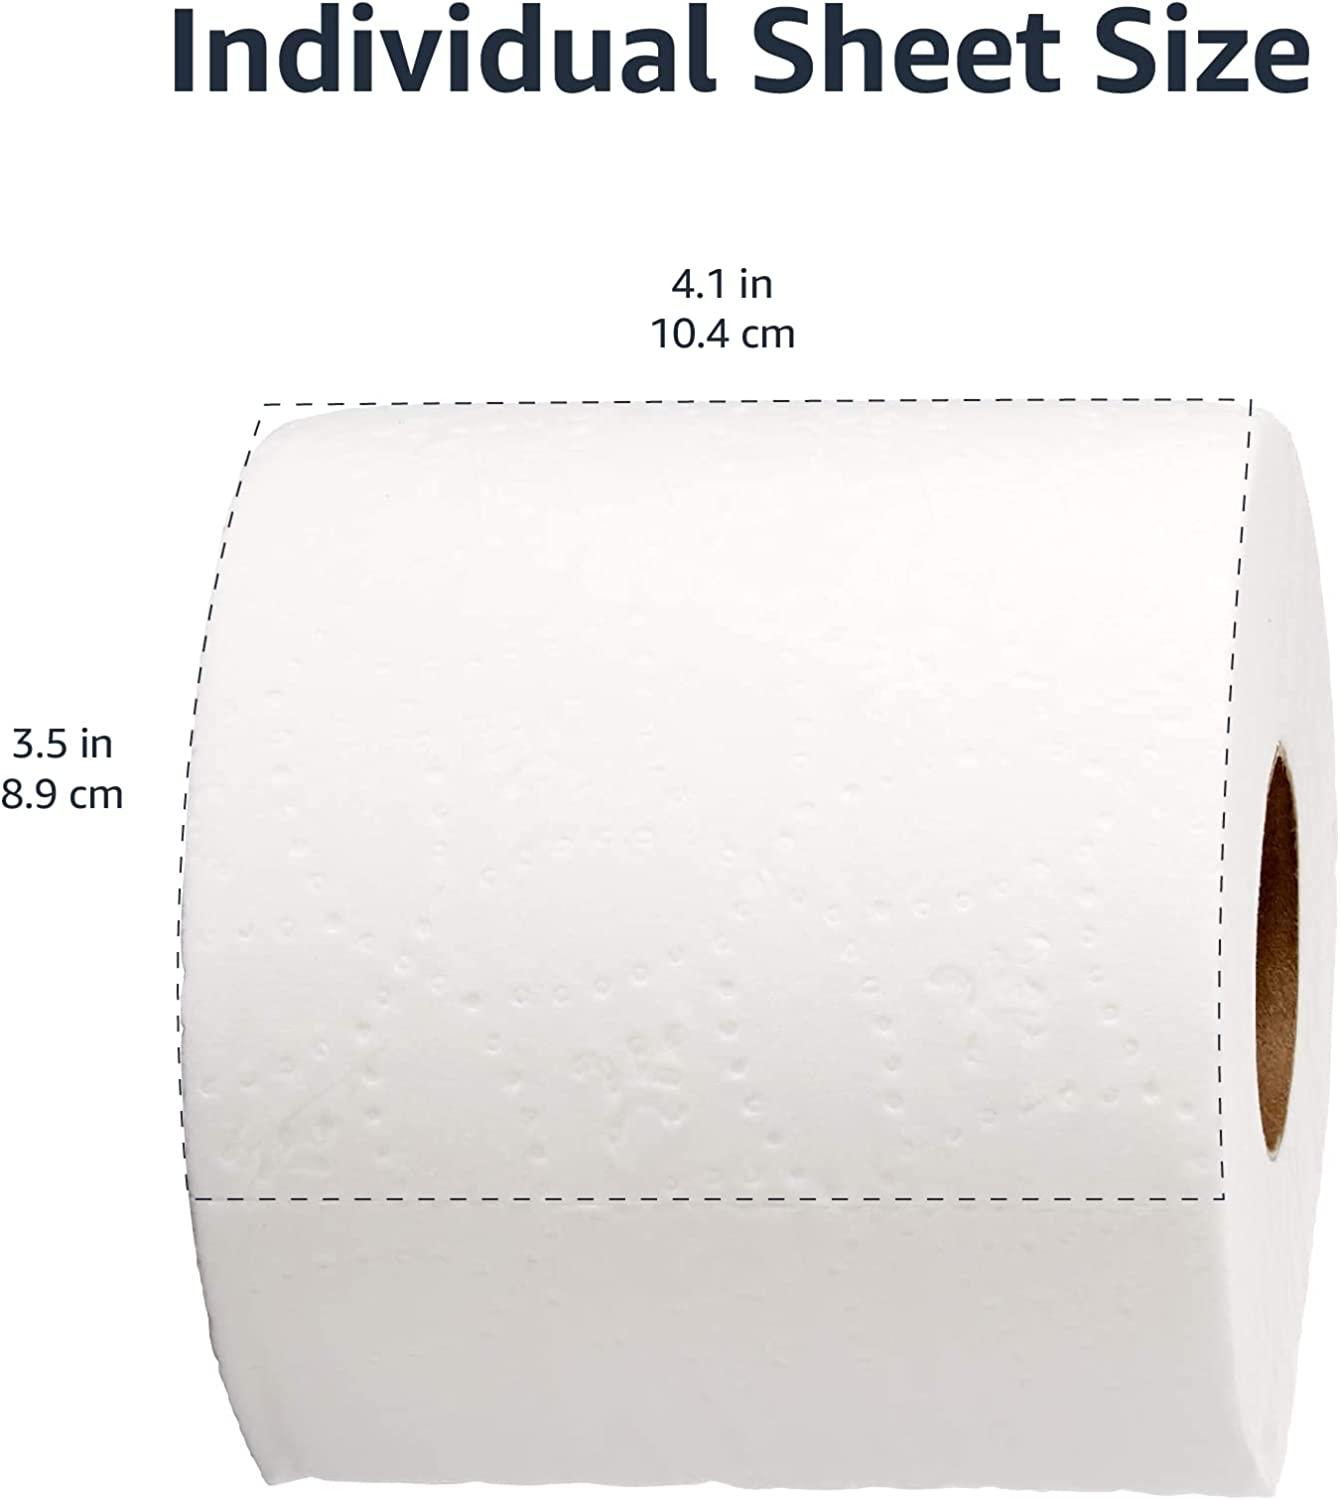 Commercial 2-Ply Quick Dispensing Toilet Paper for RV's & Marine,  Waste-Tank Compatible, Unscented, 7200 Count, 24 Packs of 300 Sheet per  Roll